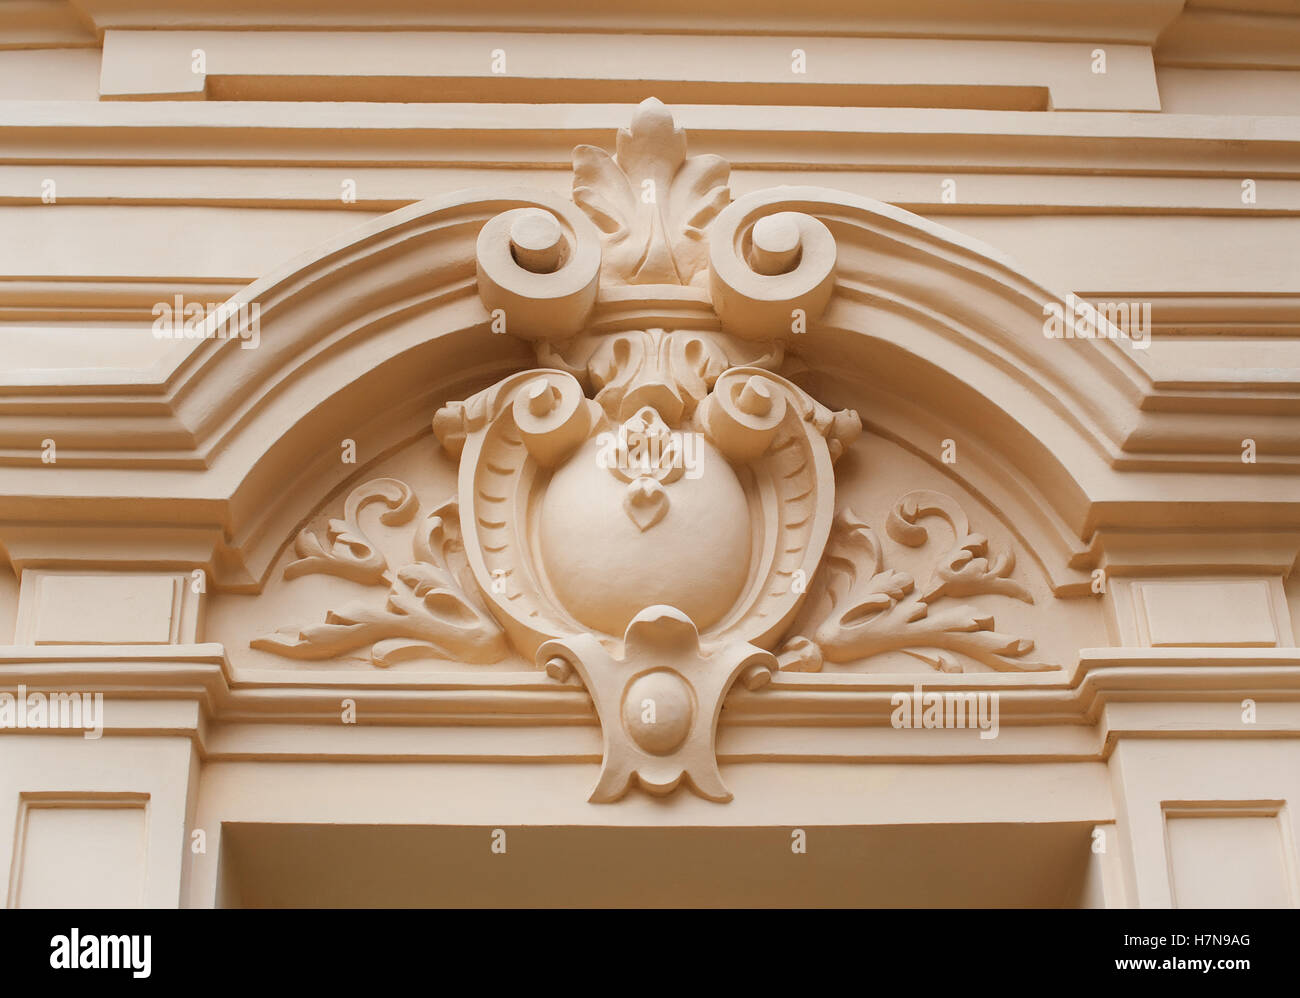 architectural molding on the wall outside the building Stock Photo